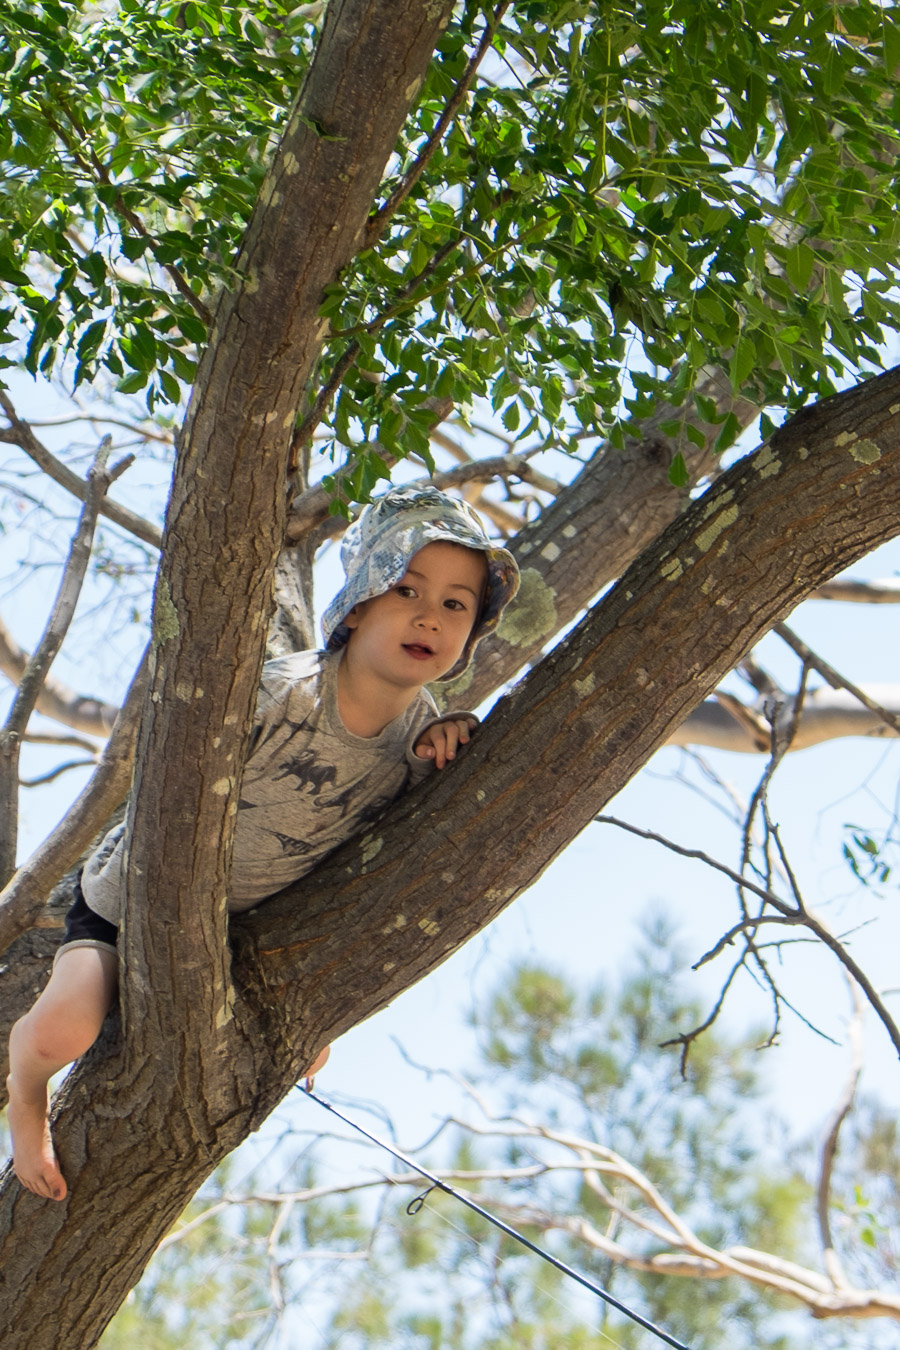 Caleb in the tree